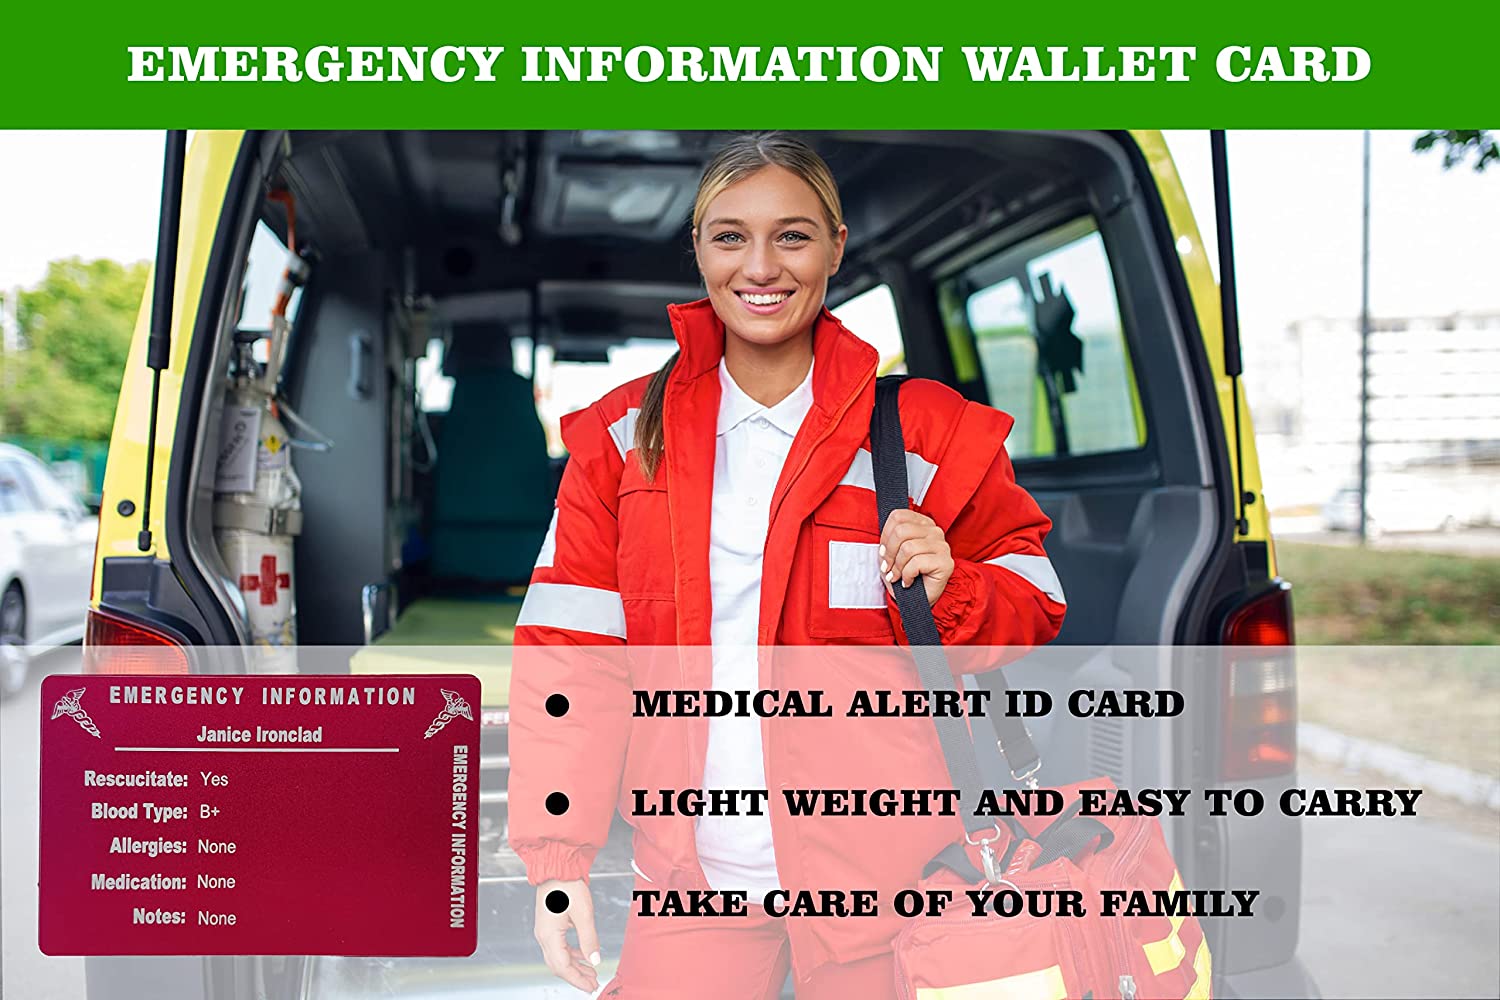 Emergency contact information card designed for wallet